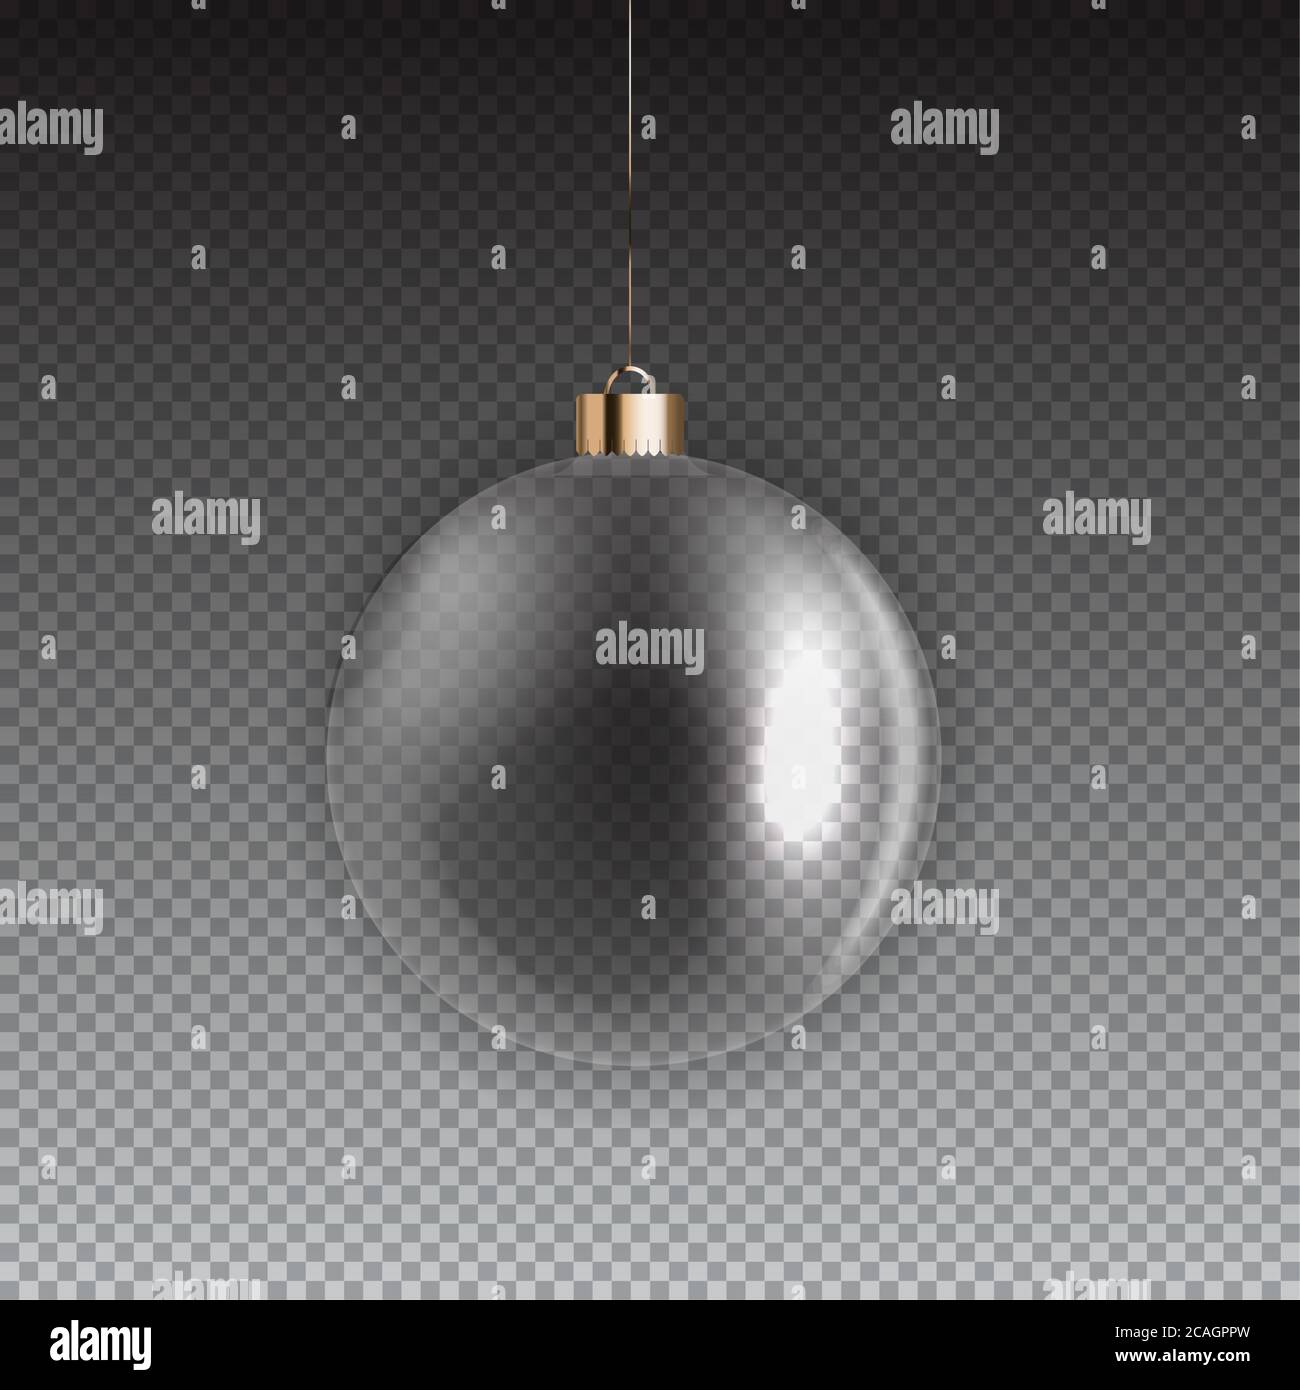 New Year and Christmas Ball on Transparent Background. Vector Illustration Stock Vector